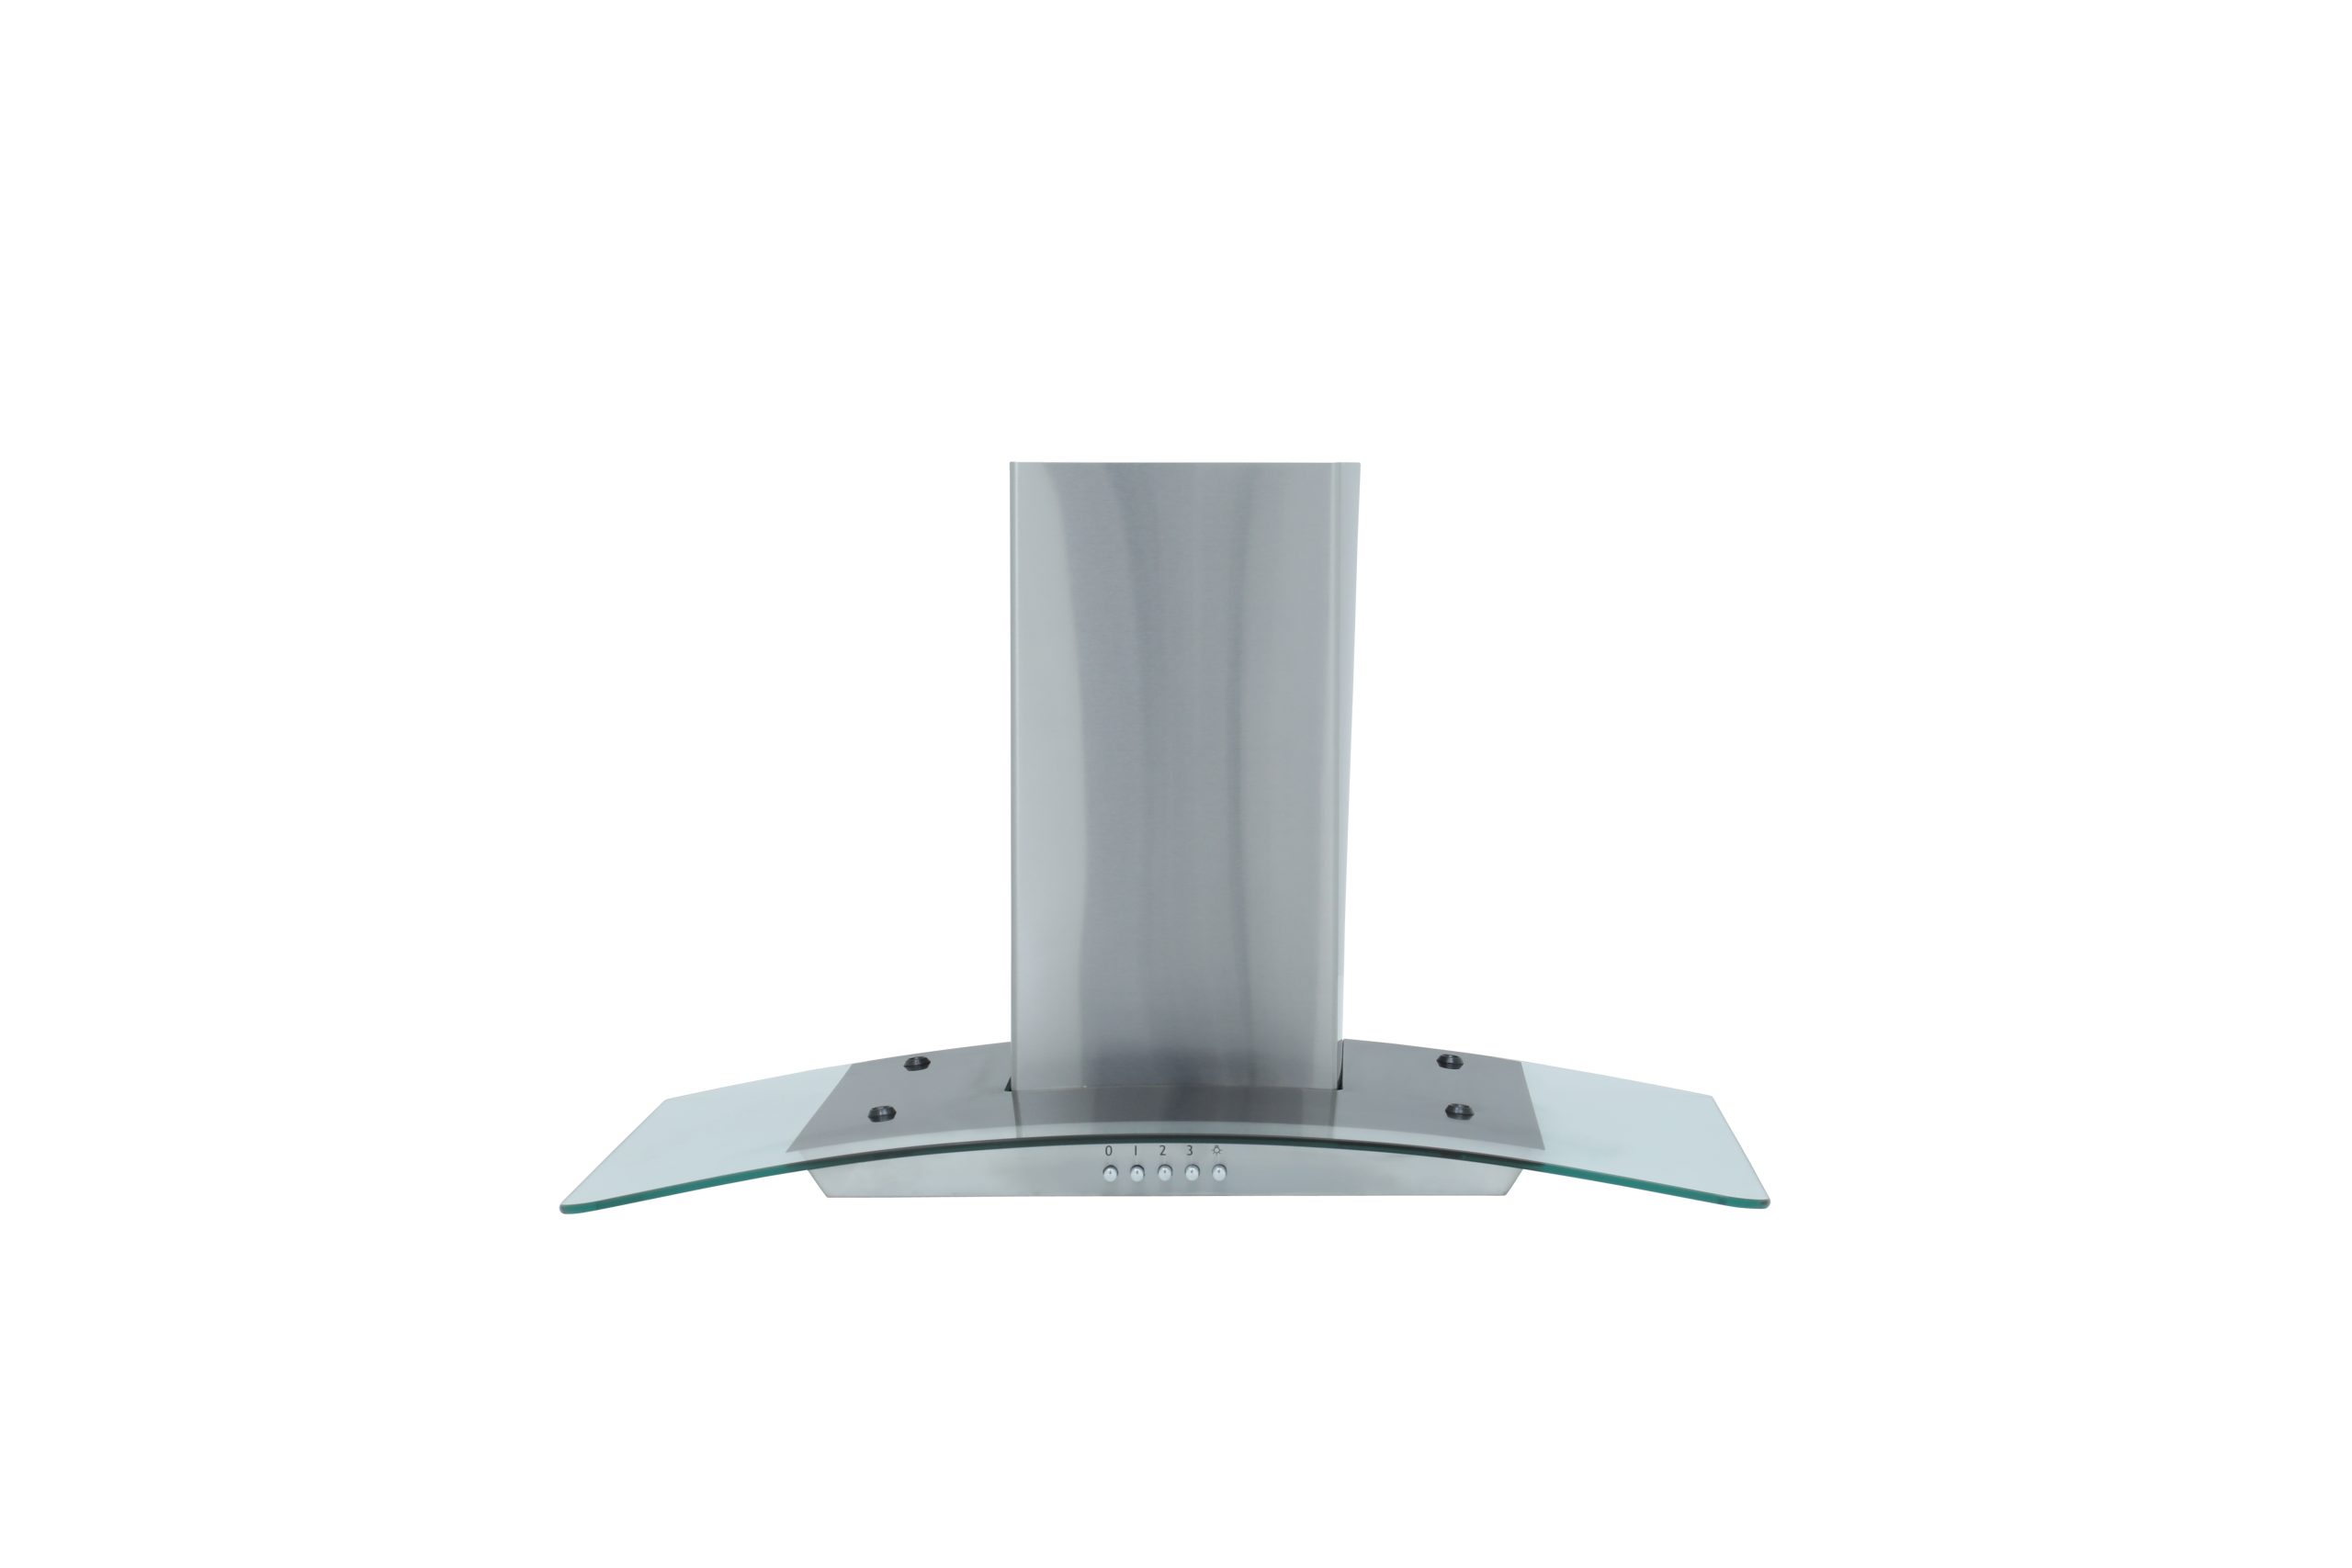 Montpellier MHG700X 70cm Curved Glass Stainless Steel Chimney Hood 1